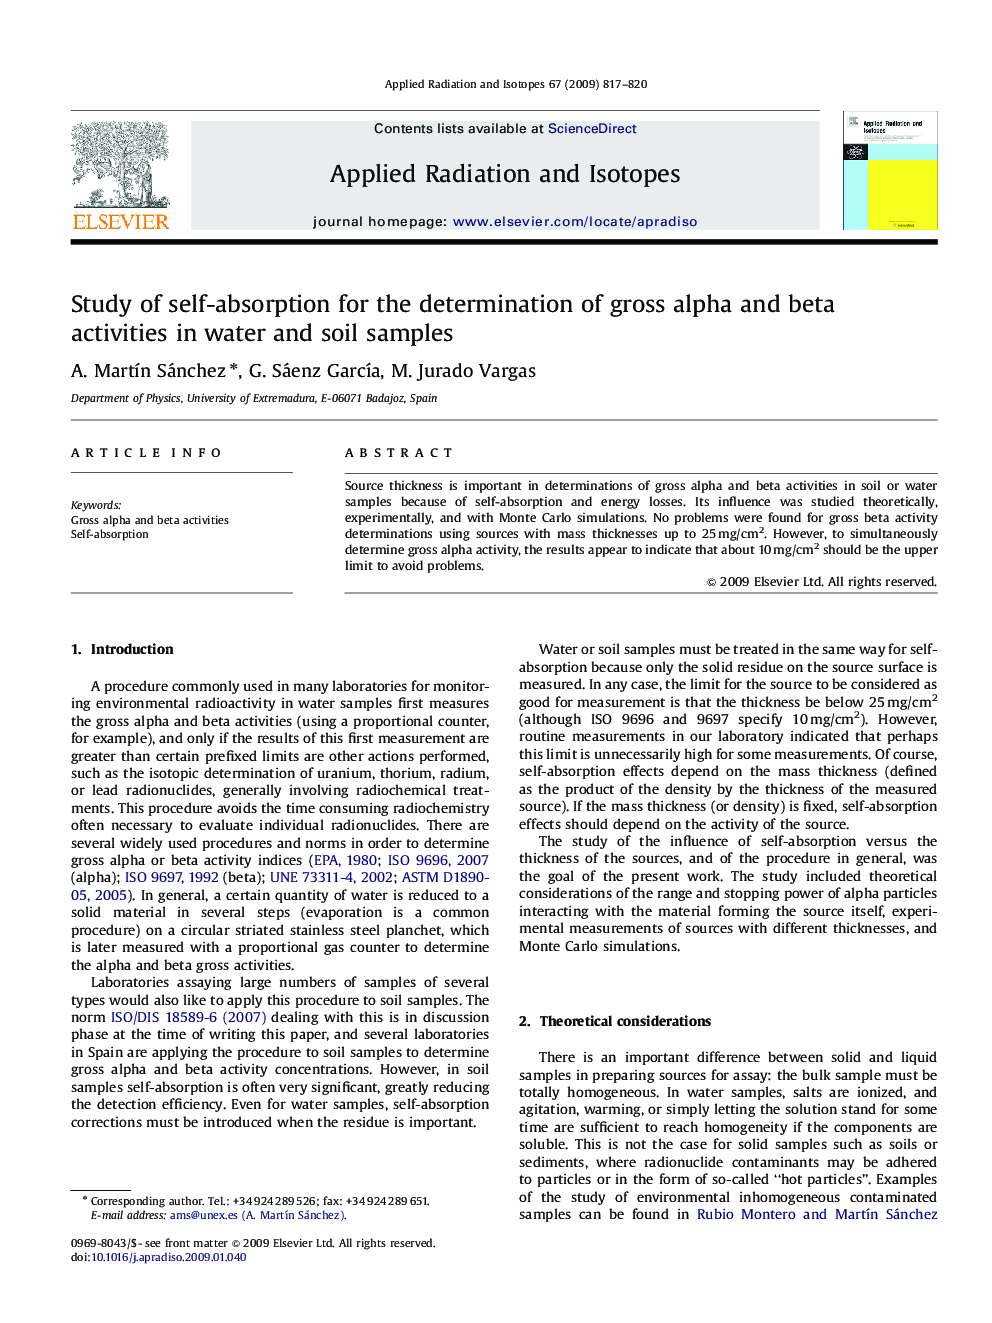 Study of self-absorption for the determination of gross alpha and beta activities in water and soil samples